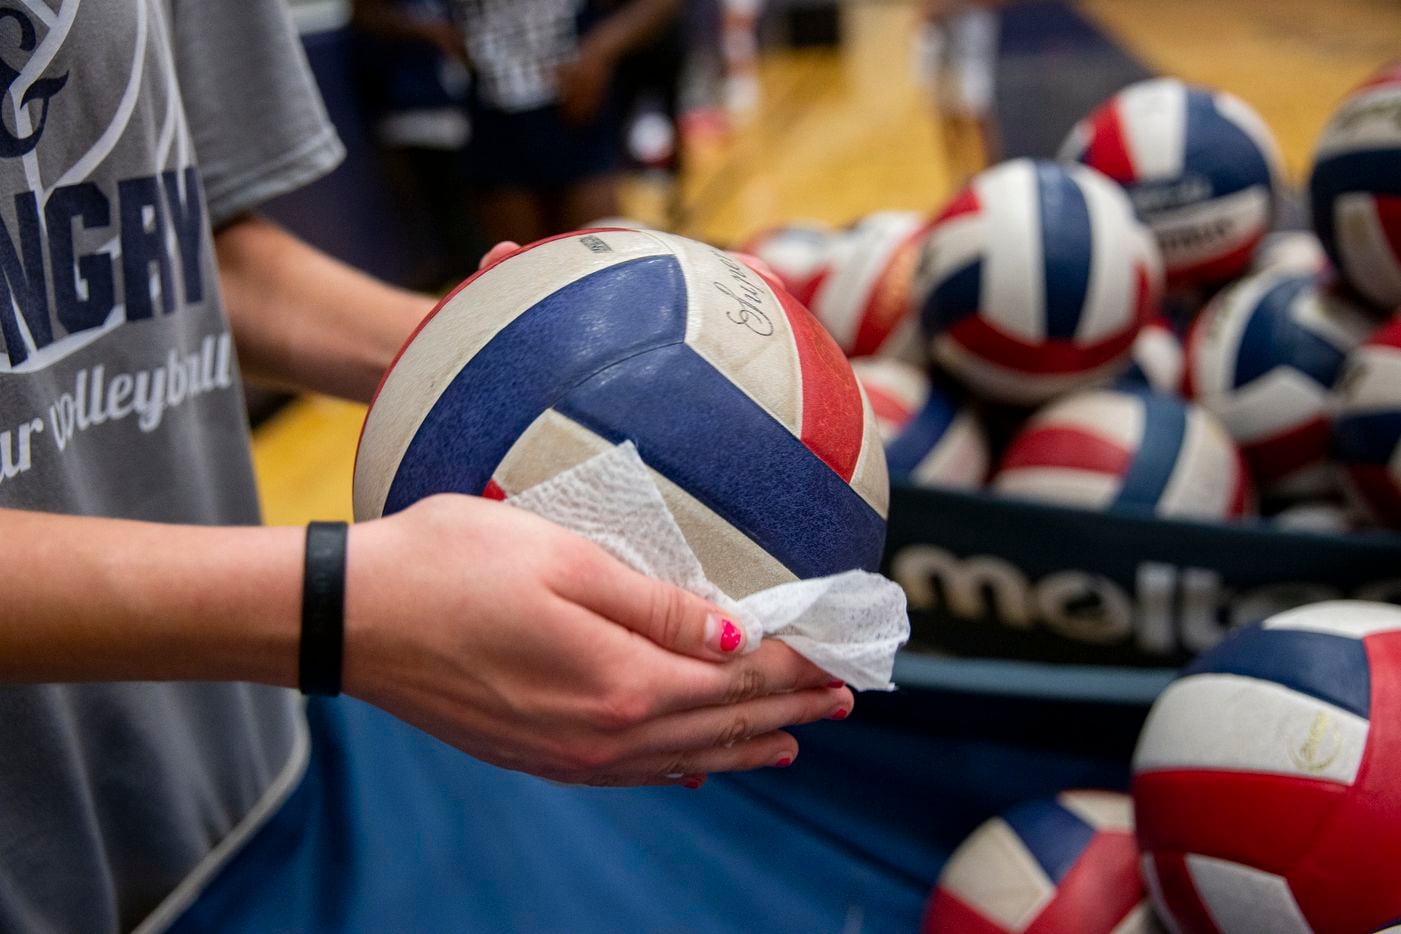 Volleyballs are sanitized after Flower Mound High School volleyball players finish practice...